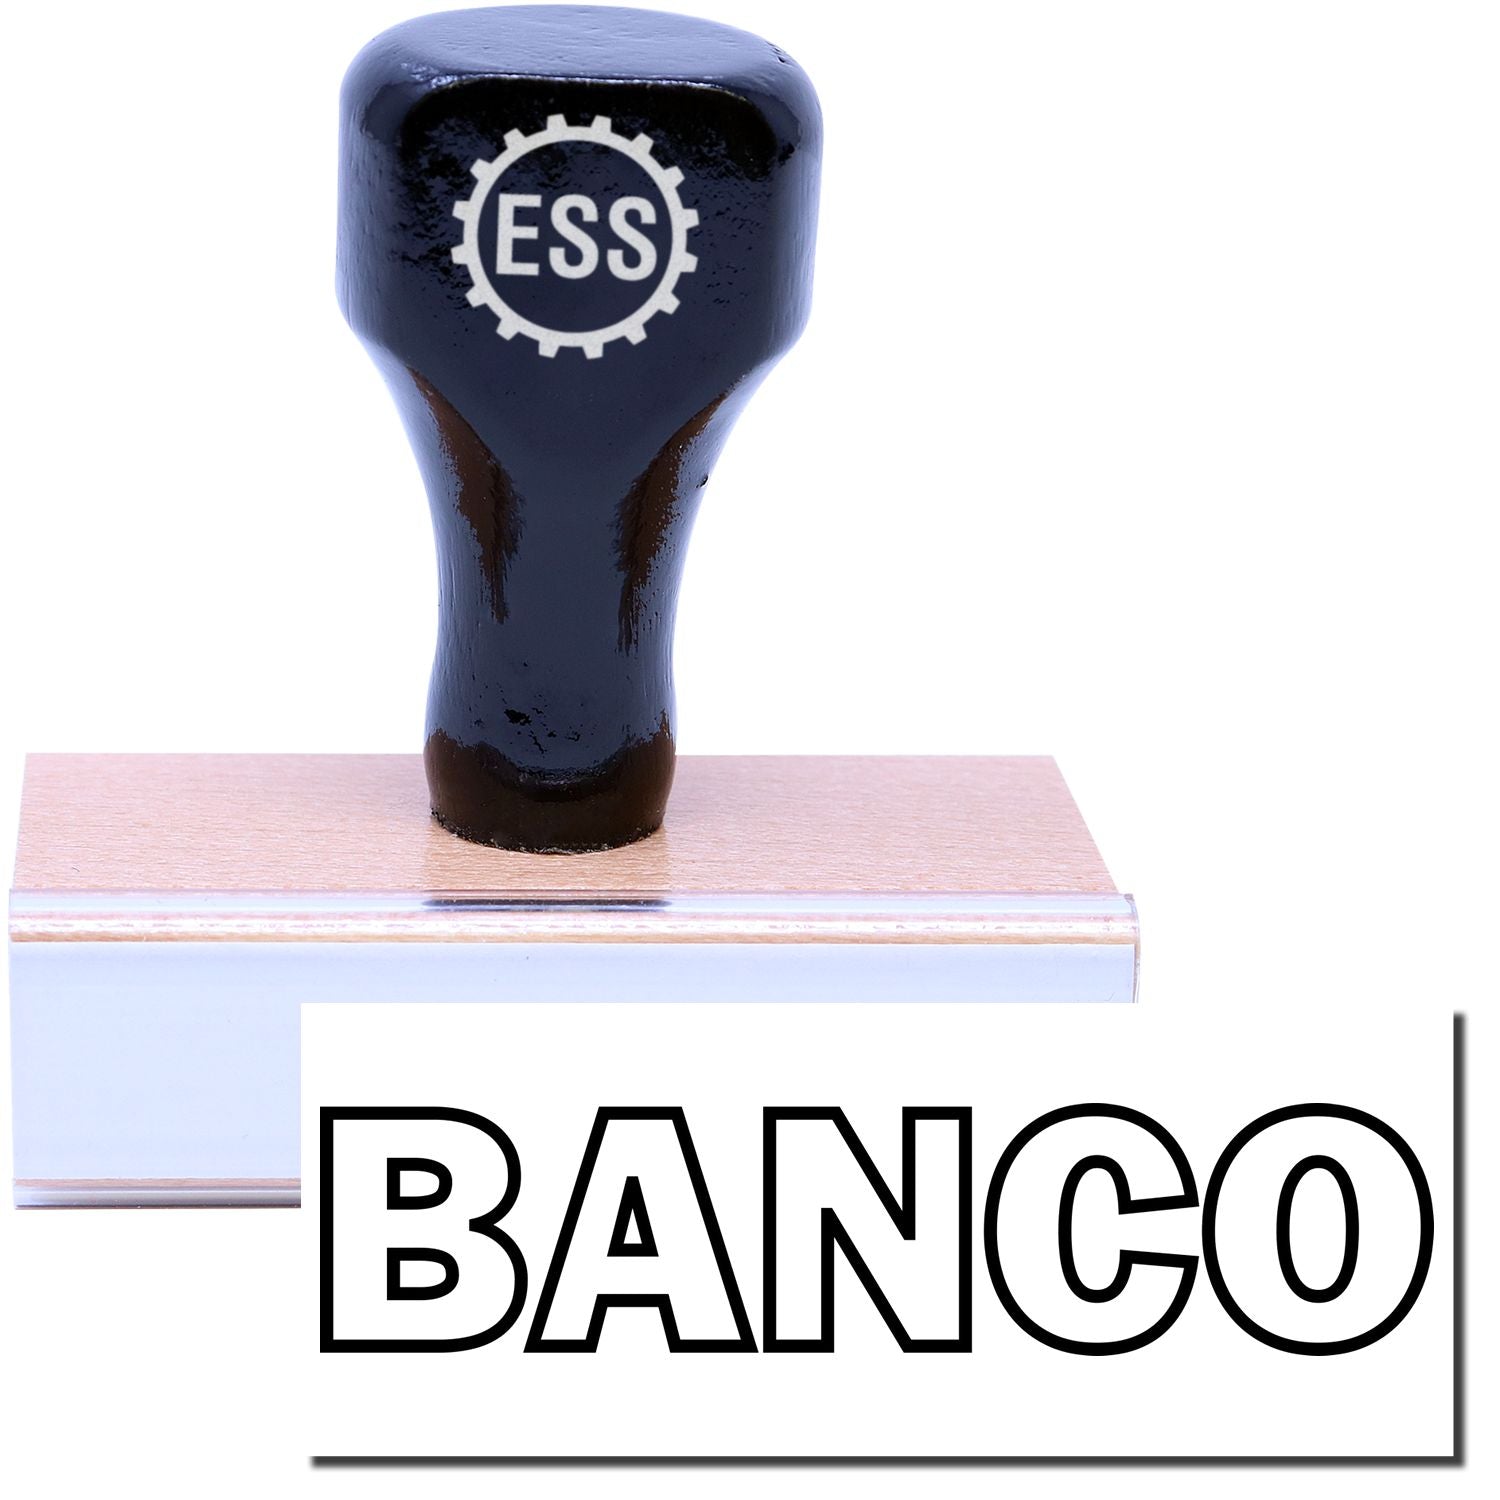 A stock office rubber stamp with a stamped image showing how the text "BANCO" in an outline font is displayed after stamping.